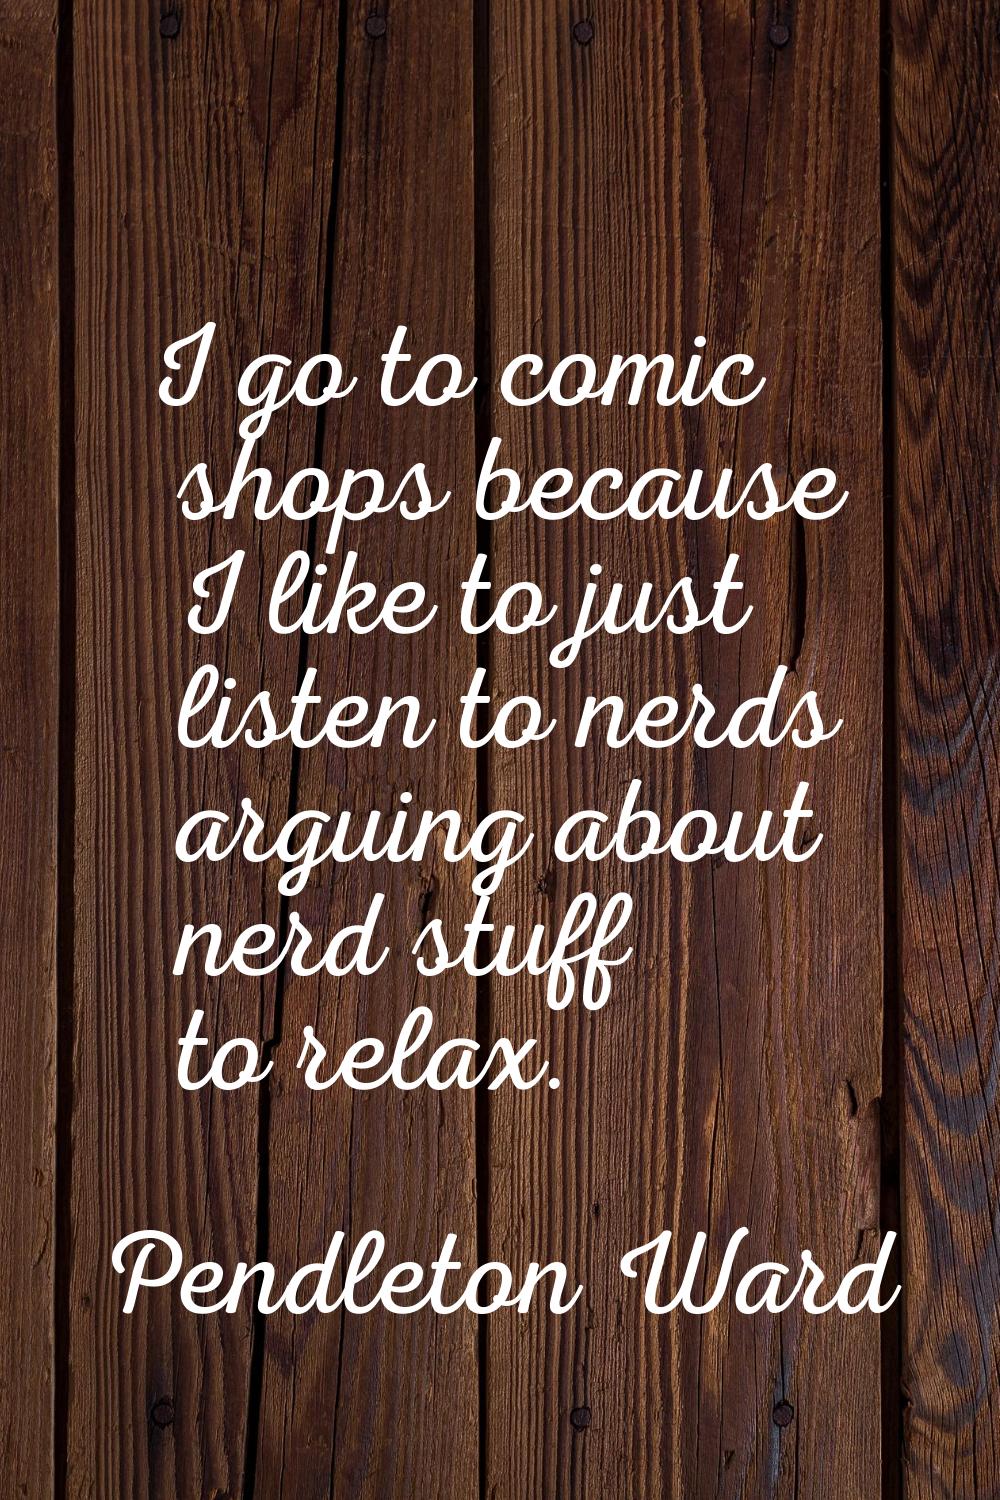 I go to comic shops because I like to just listen to nerds arguing about nerd stuff to relax.